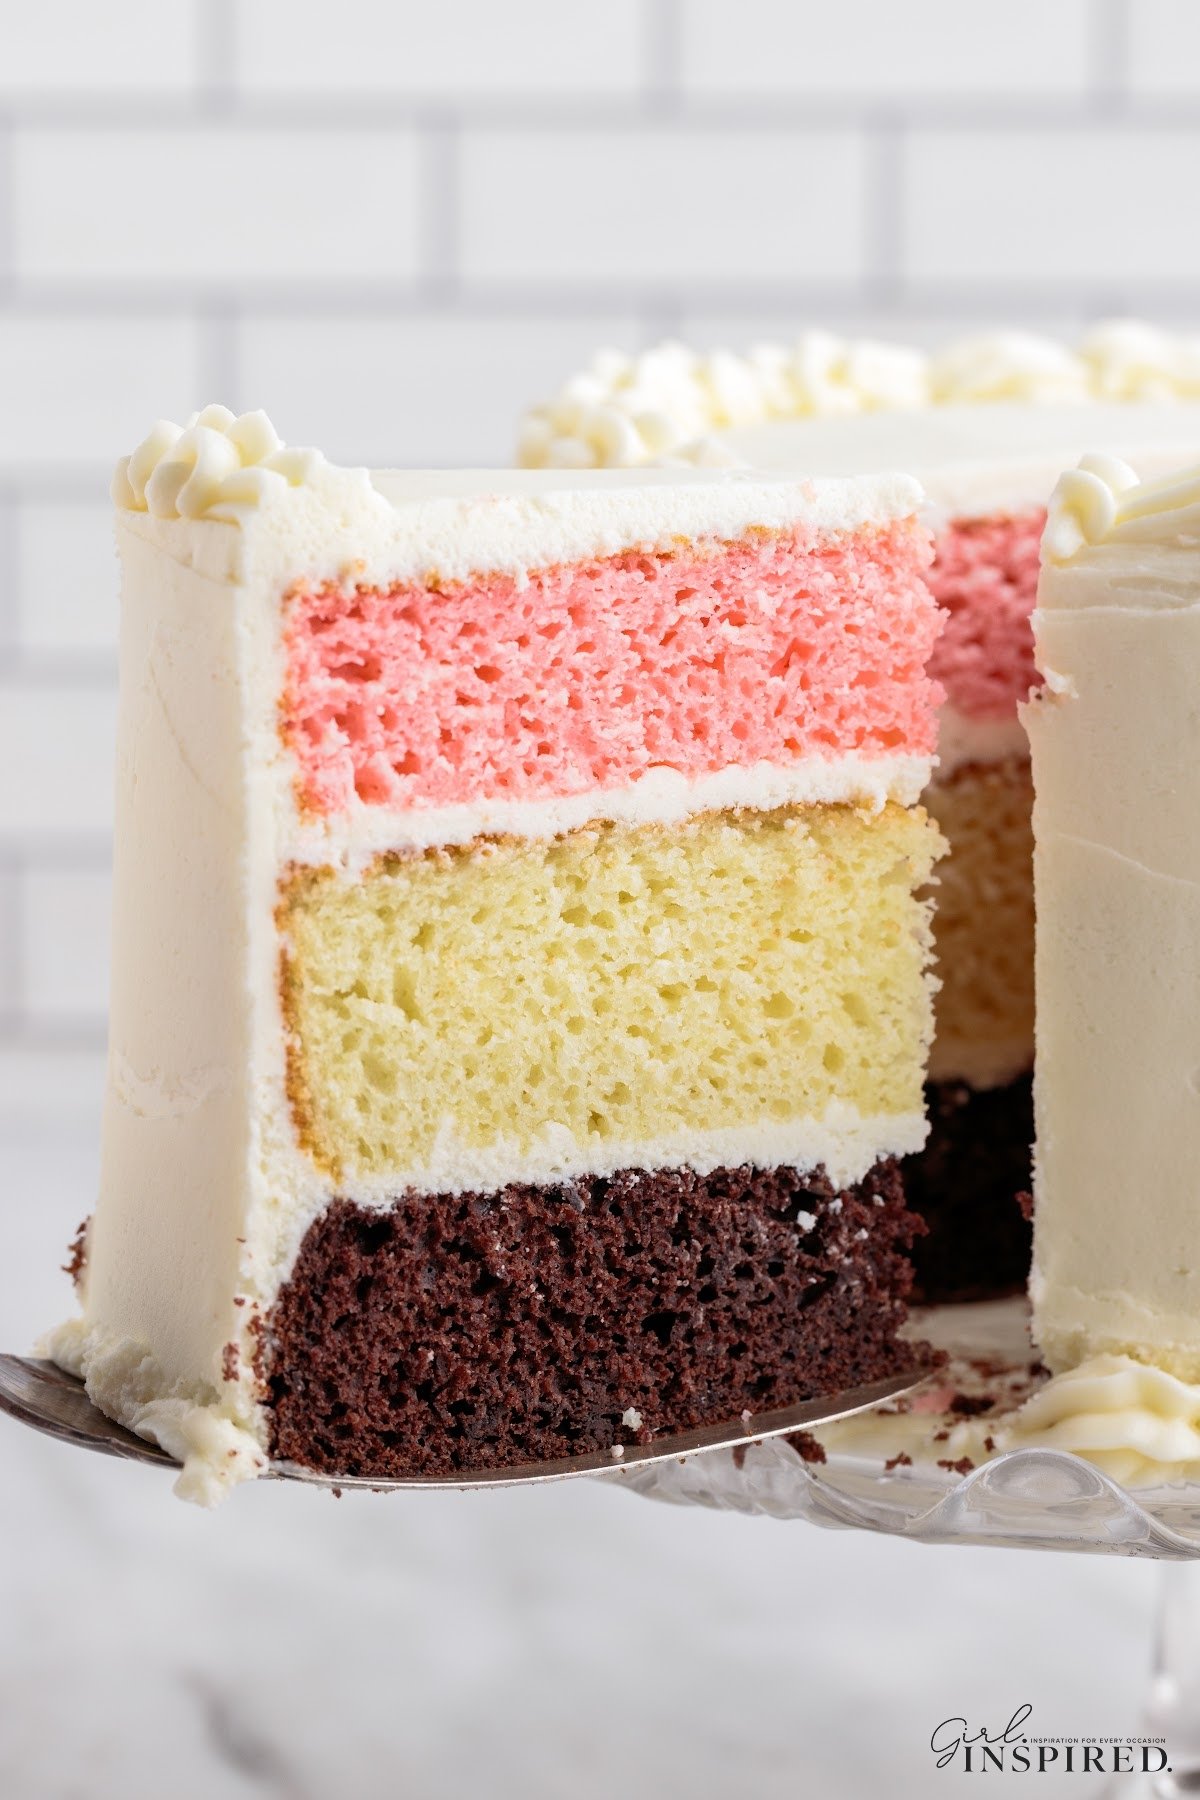 Slice of Neapolitan Cake on a plate ready to eat.